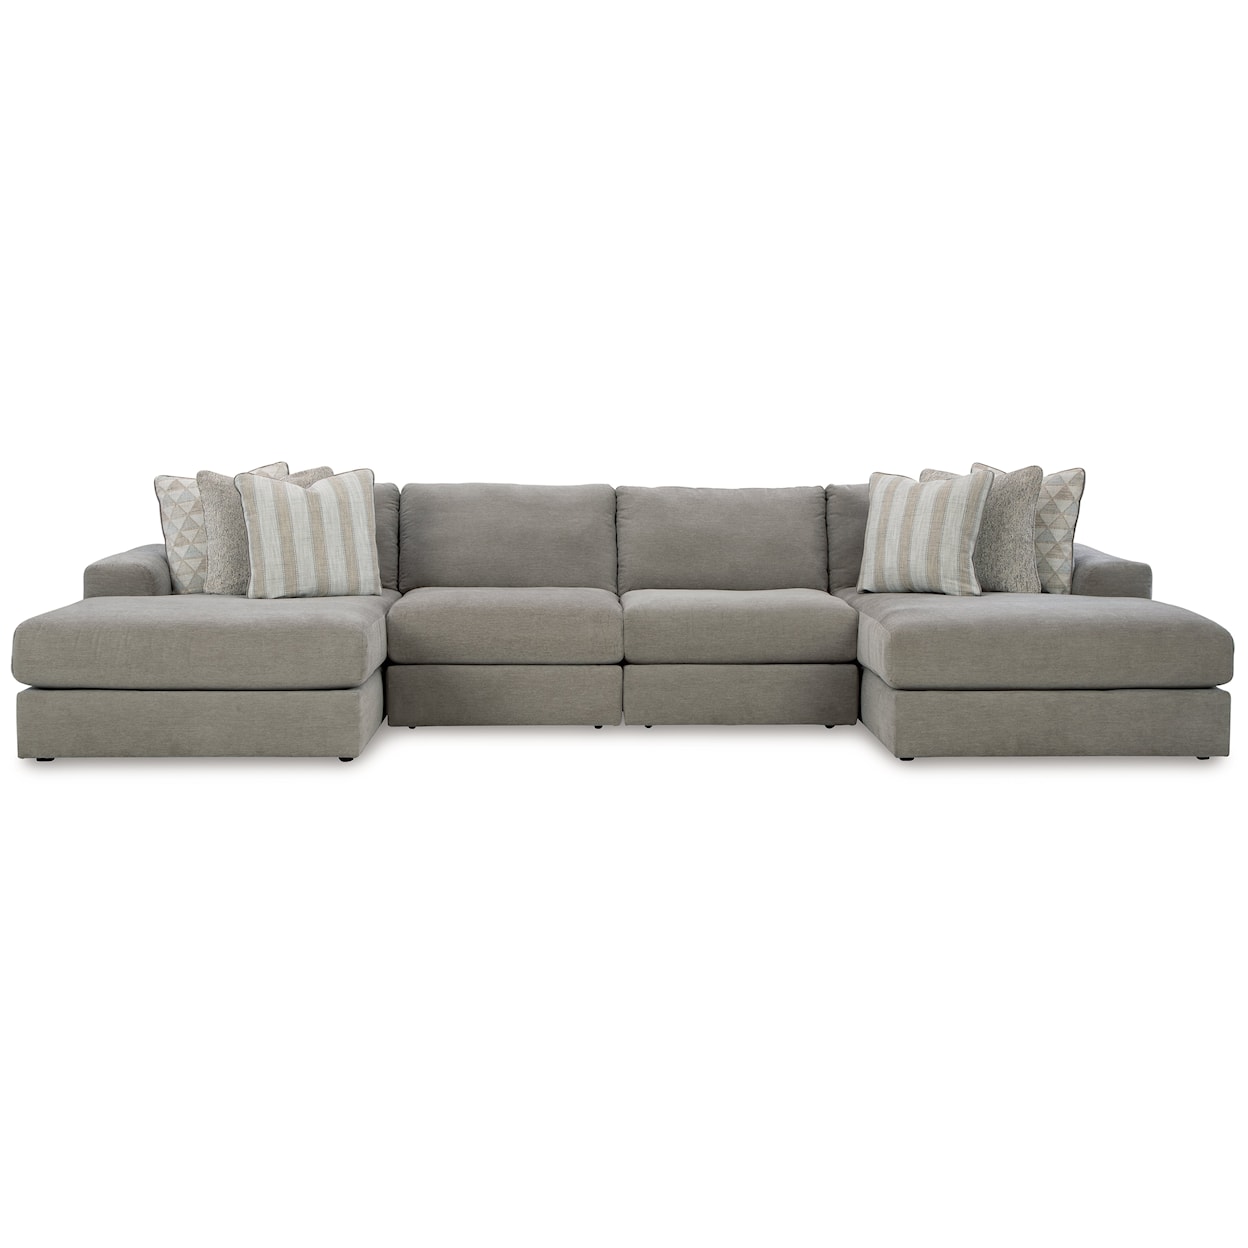 Signature Design by Ashley Furniture Avaliyah 4-Piece Double Chaise Sectional